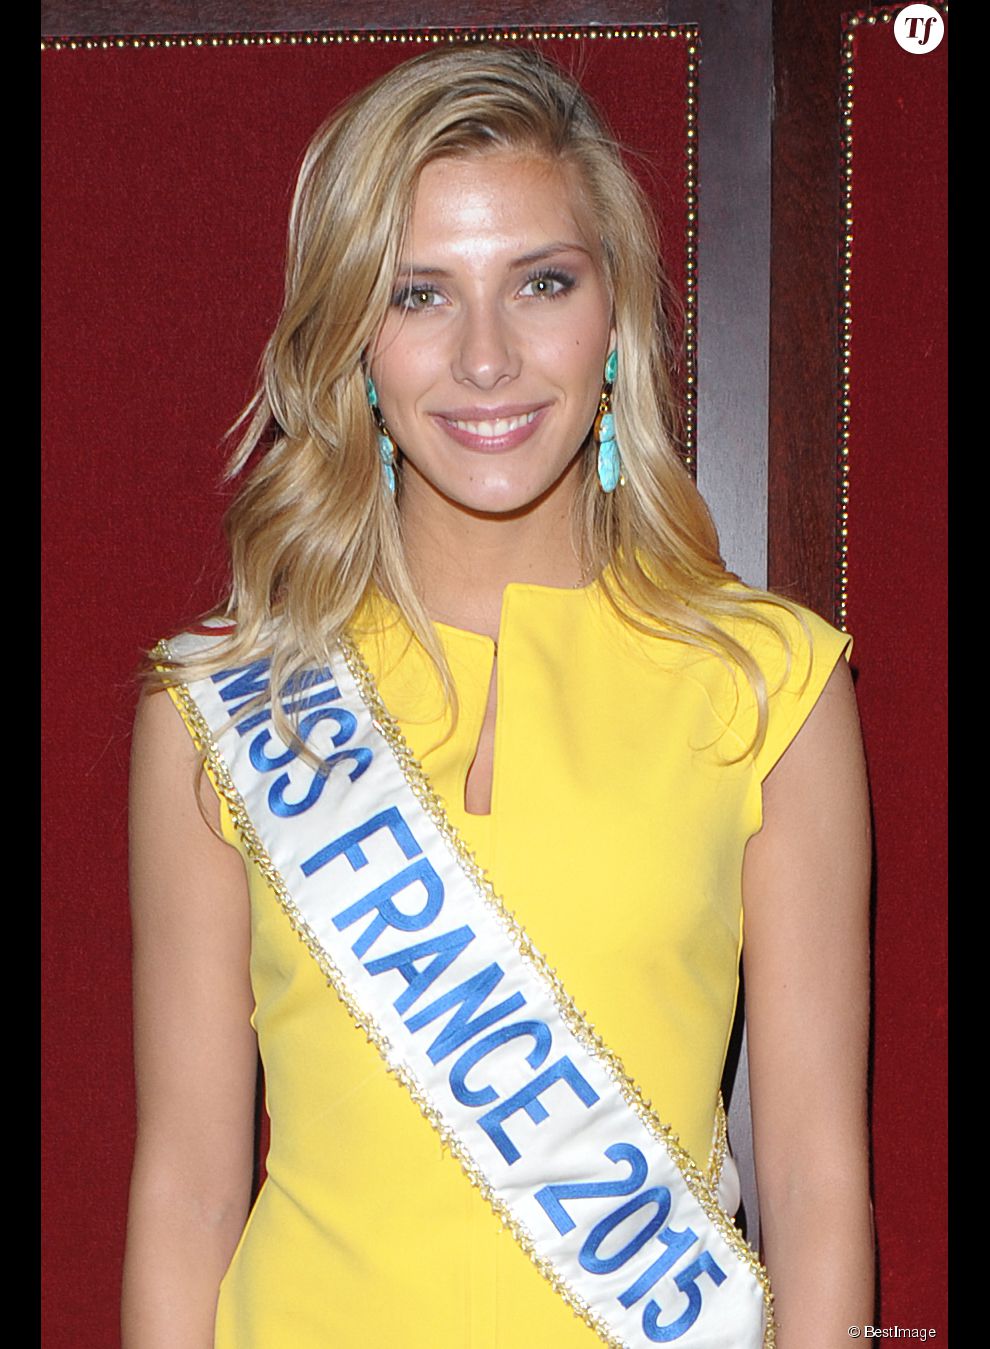 Miss France 2015, Camille Cerf